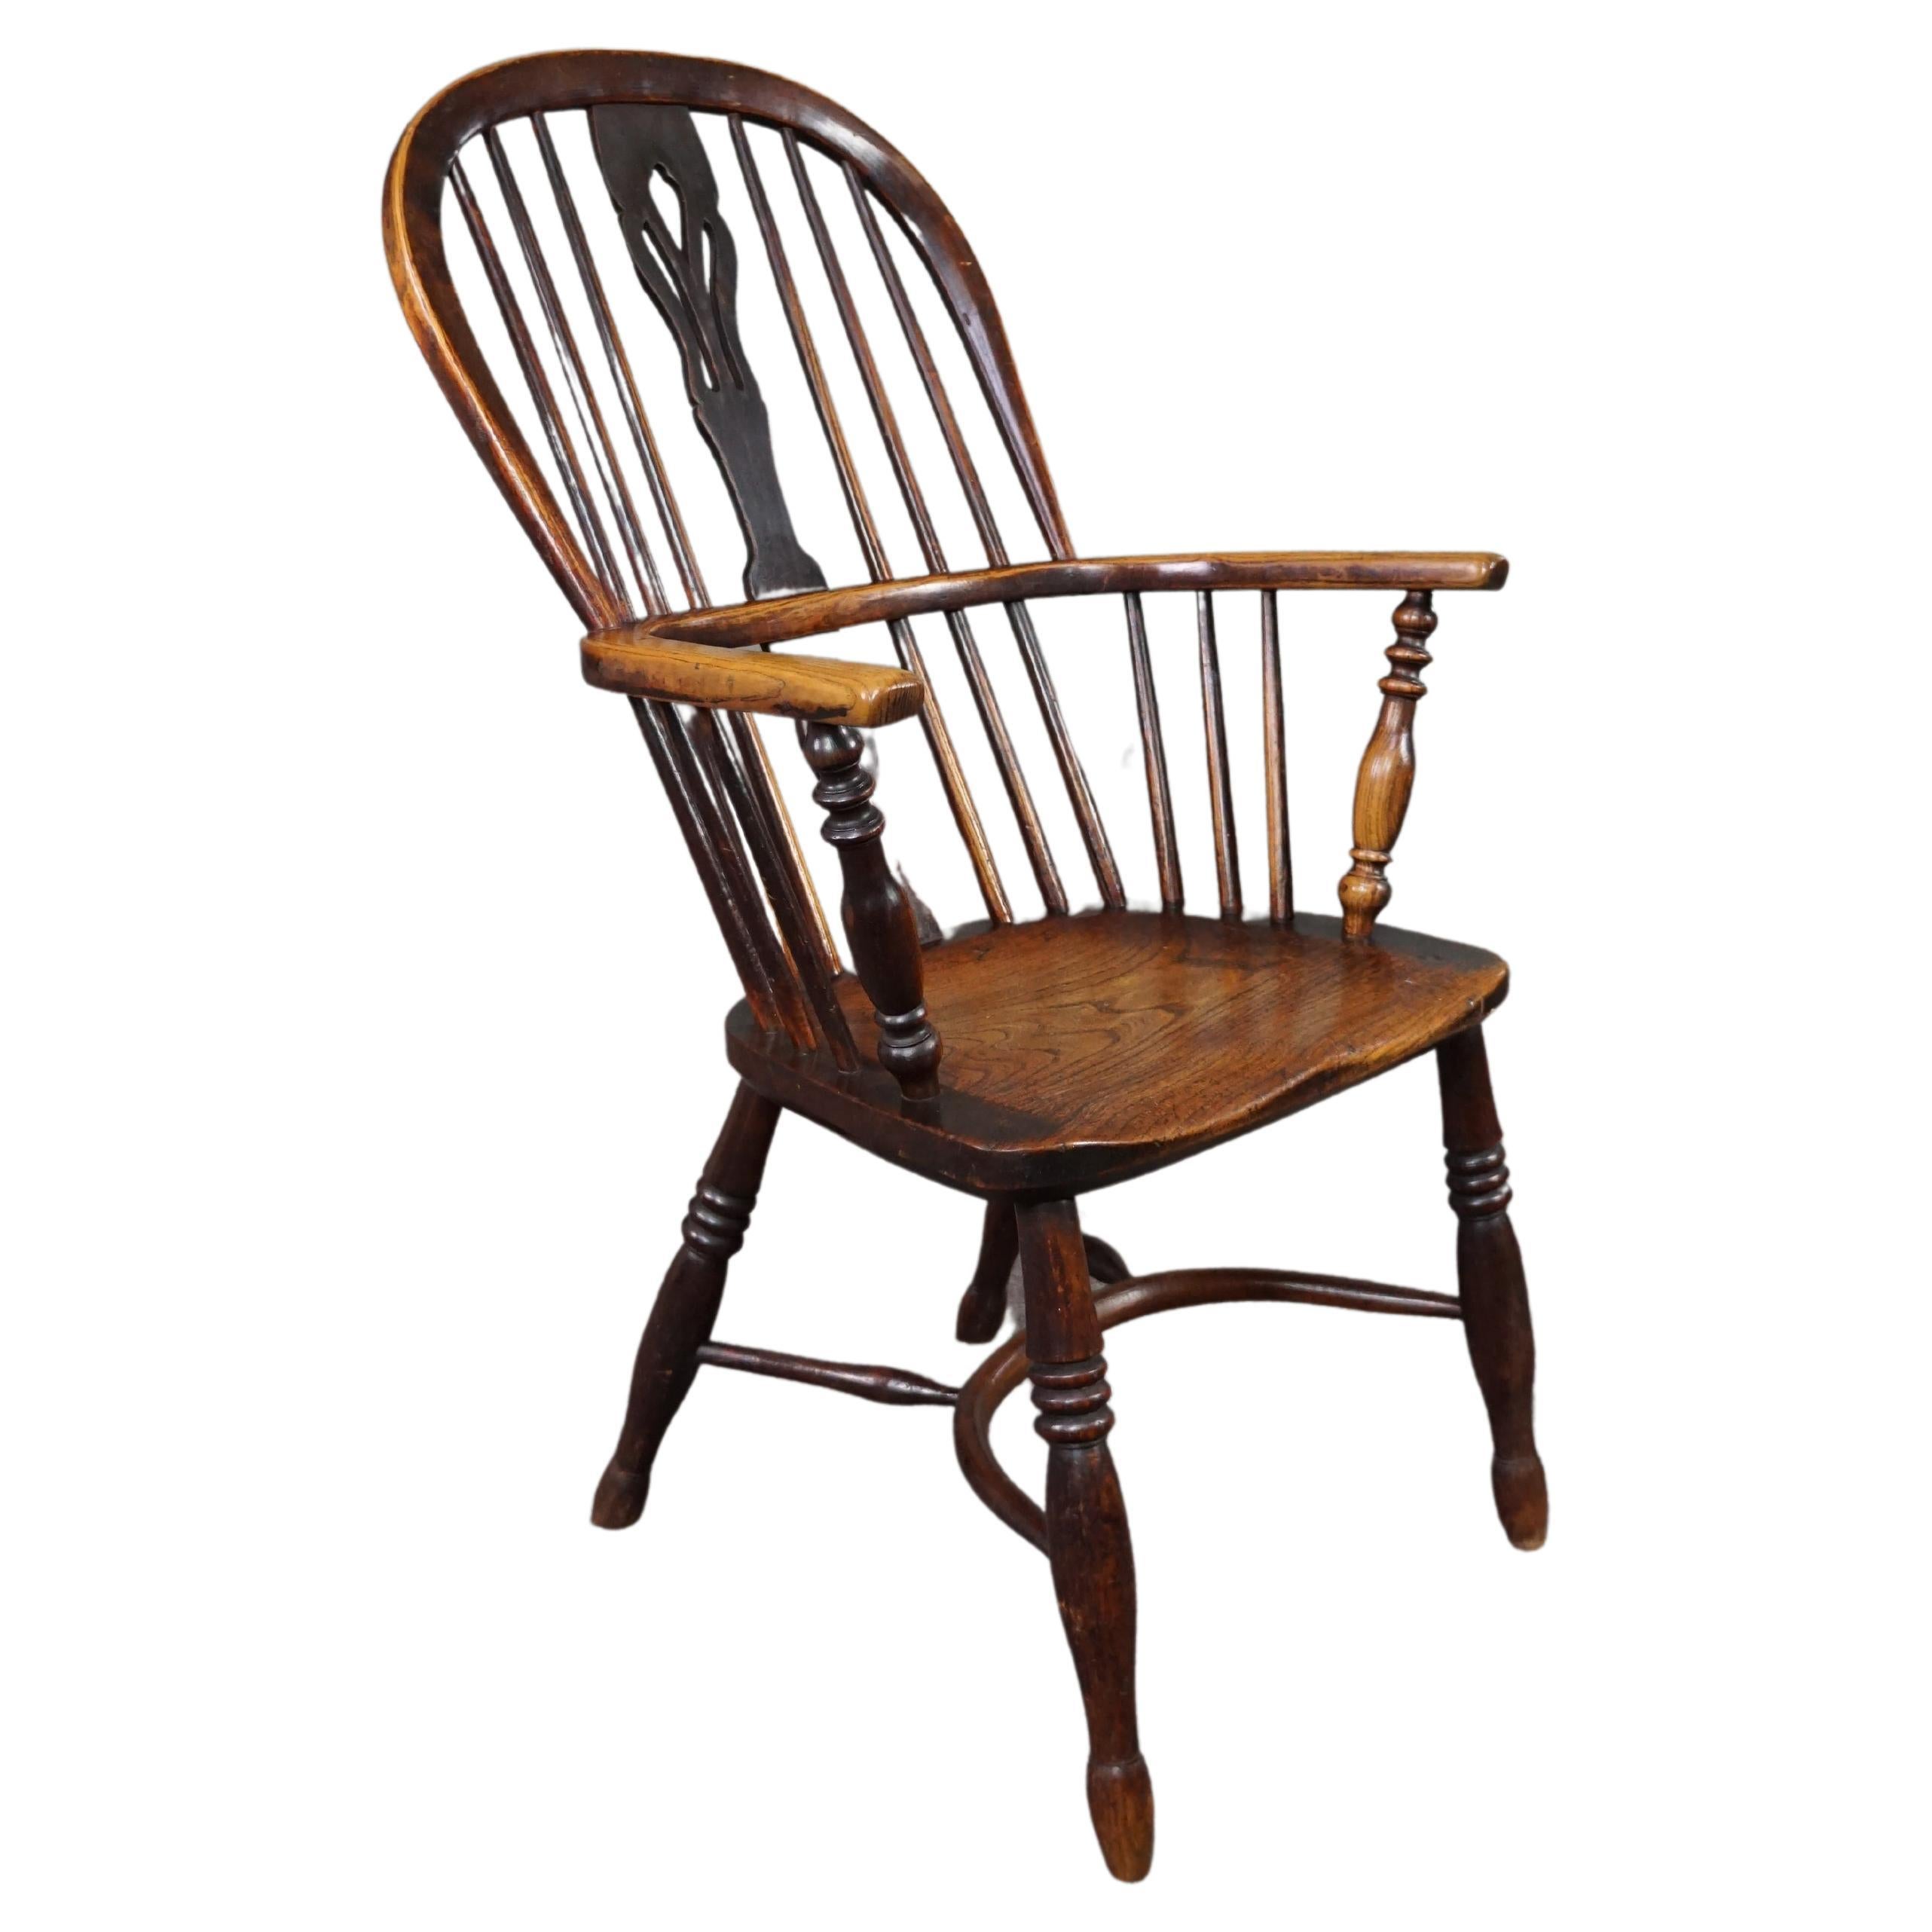 English antique Windsor armchair/chair, High Back, 18th century For Sale